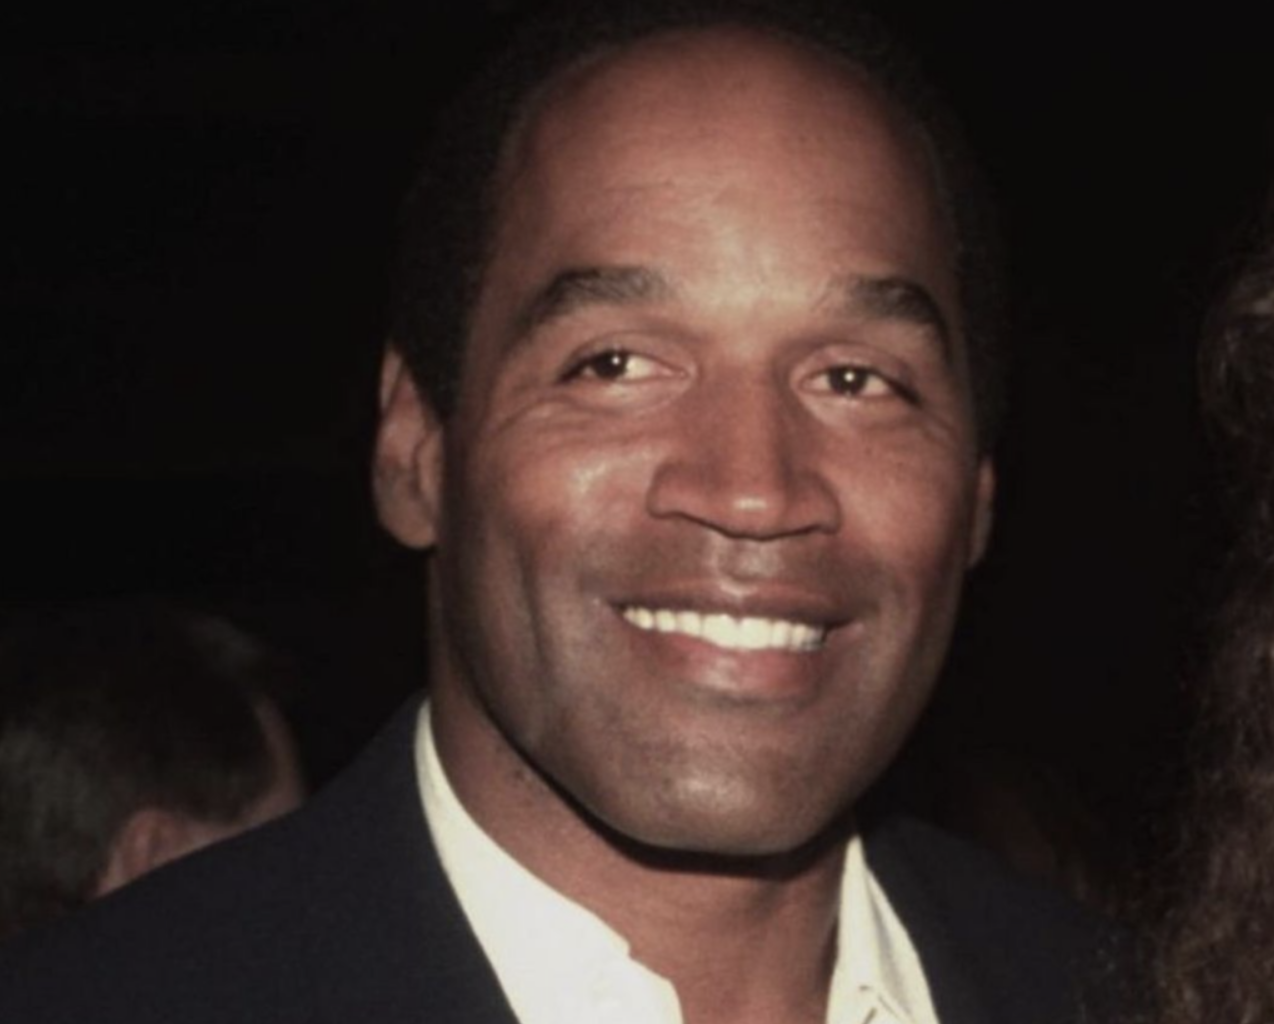 O.J. Simpson’s Passing: The Truth Behind the Rumors